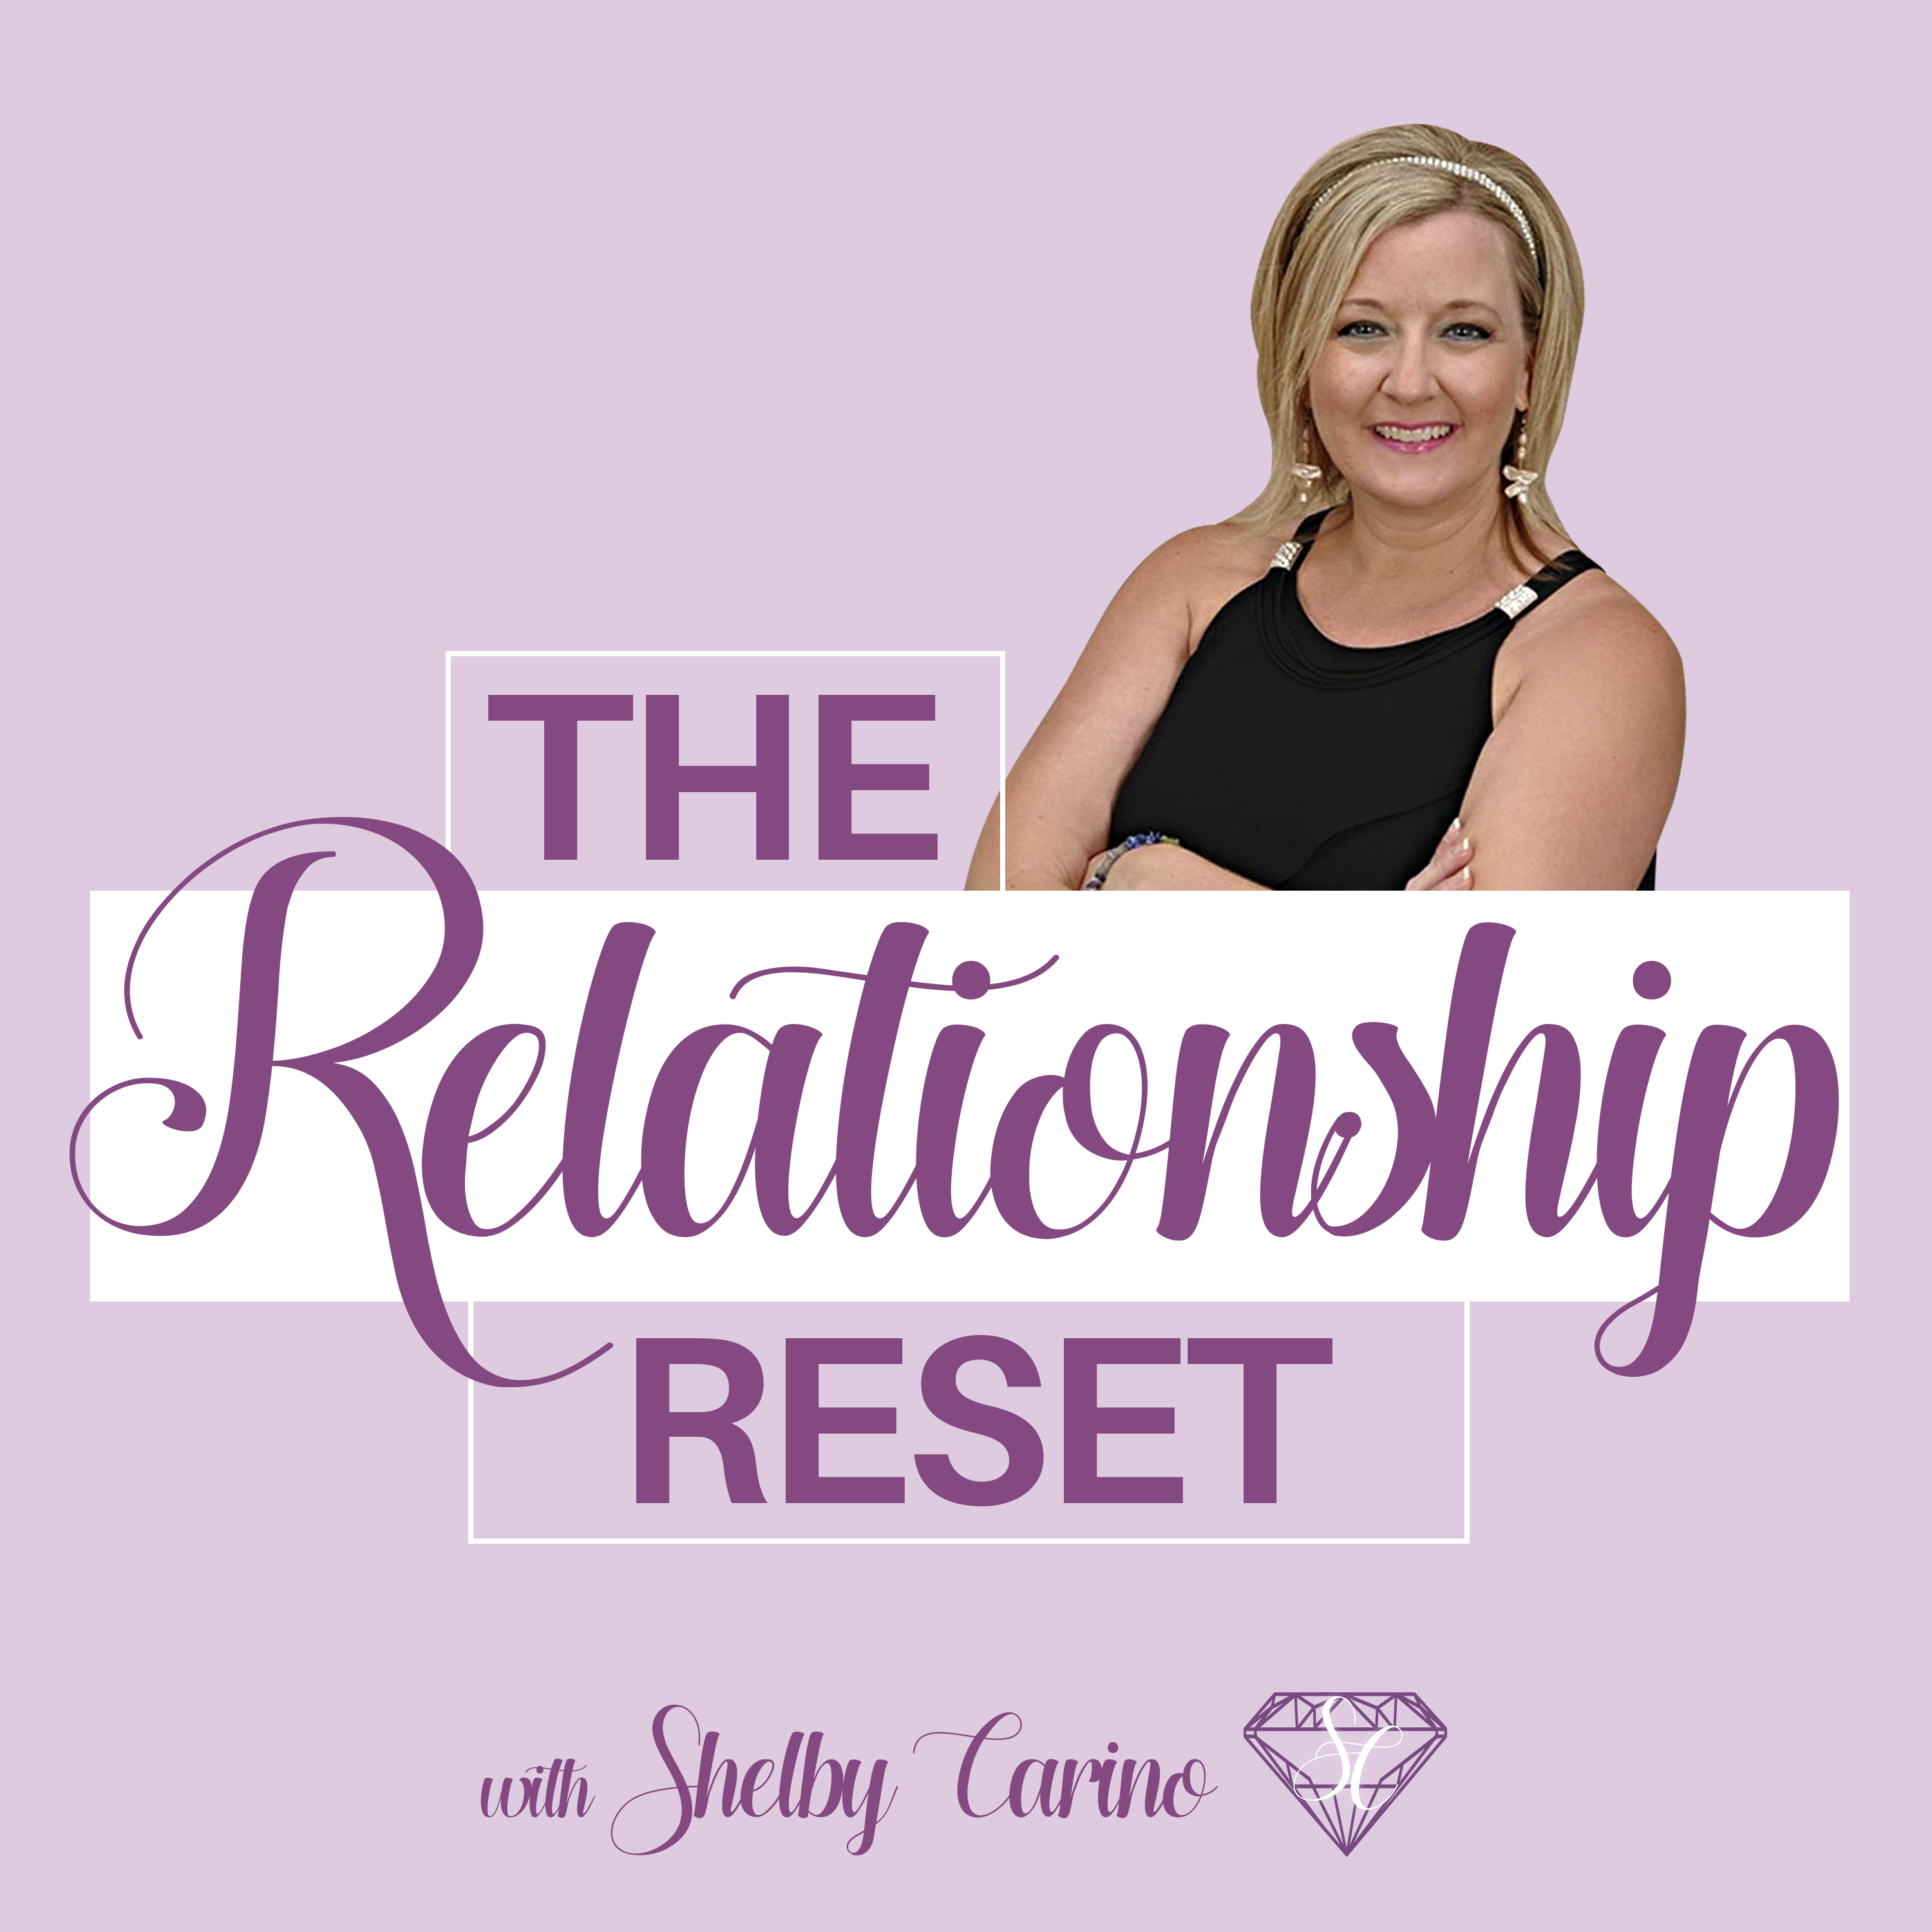 Artwork for podcast The Relationship Reset